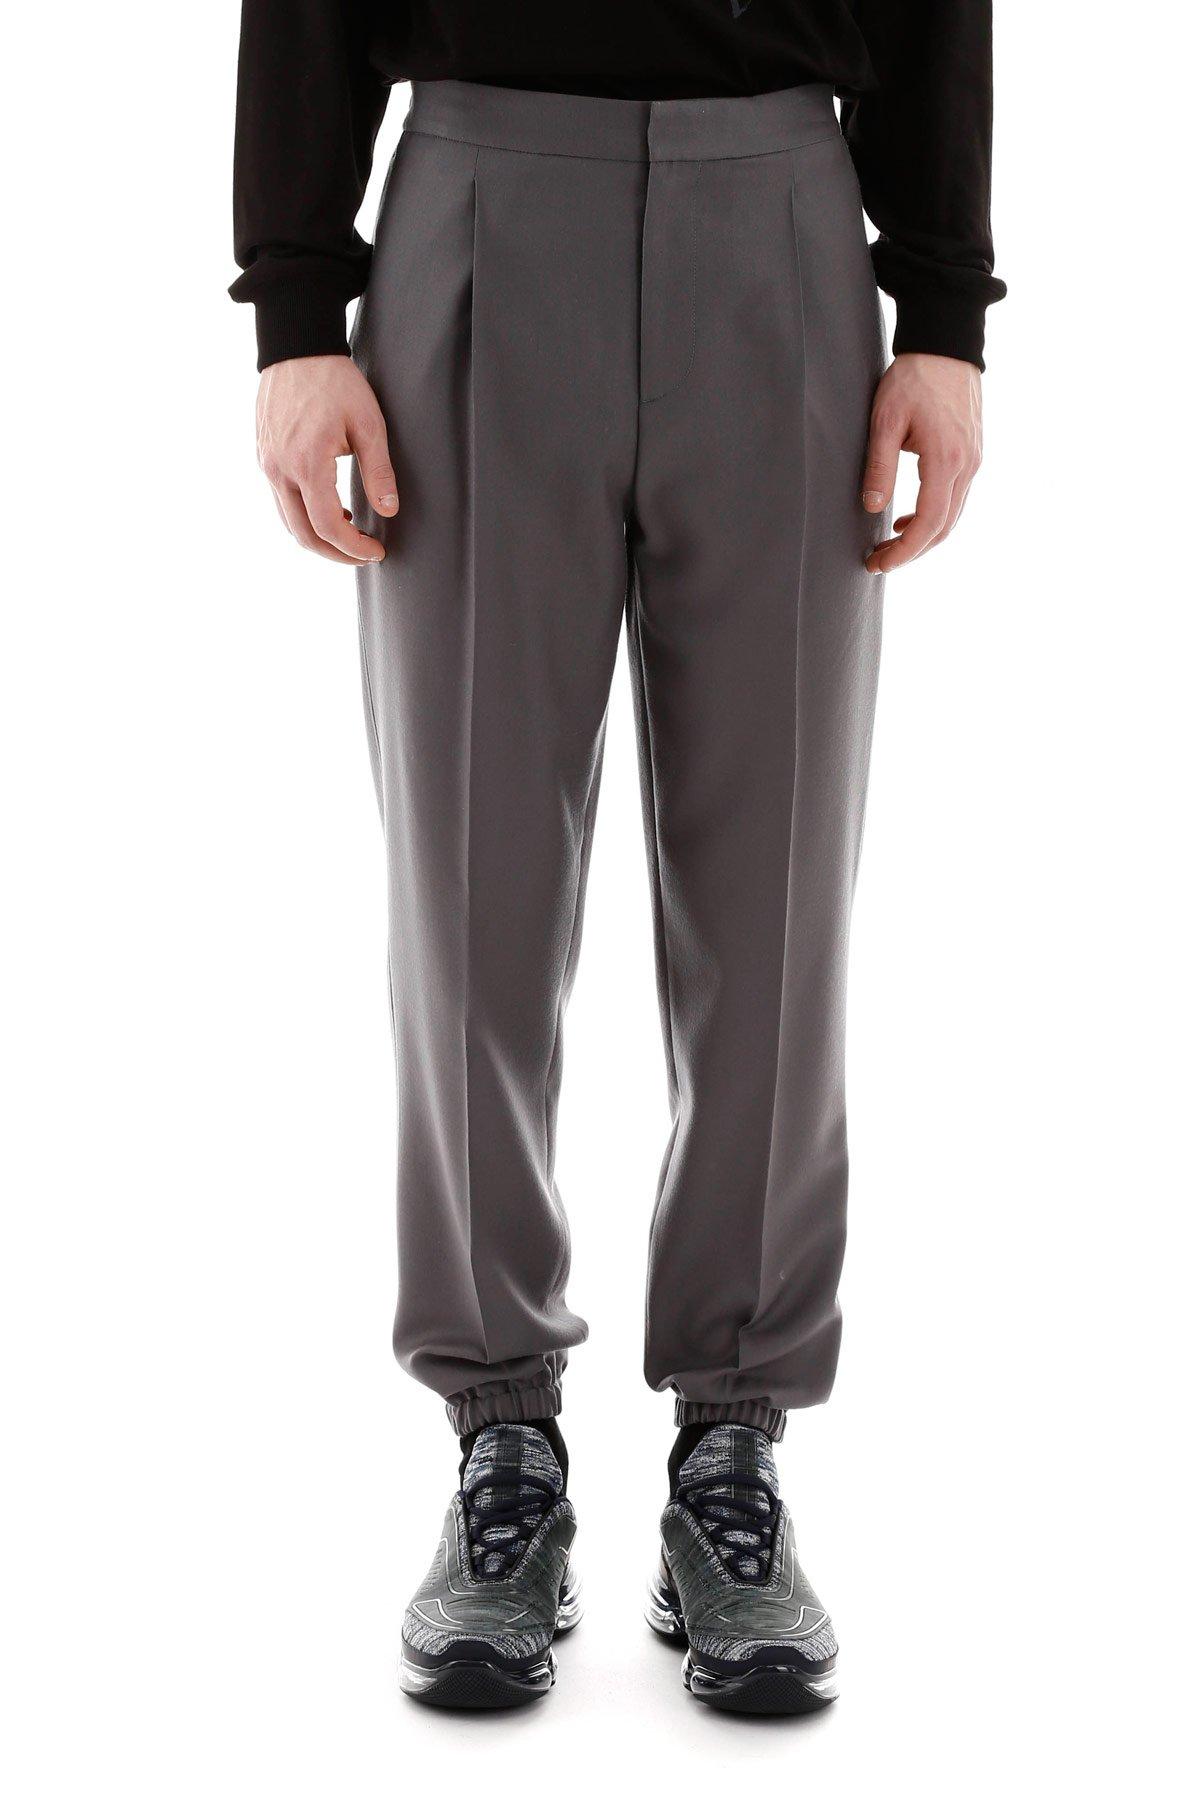 Dior Wool jogger Pants in Grey (Gray) for Men - Lyst